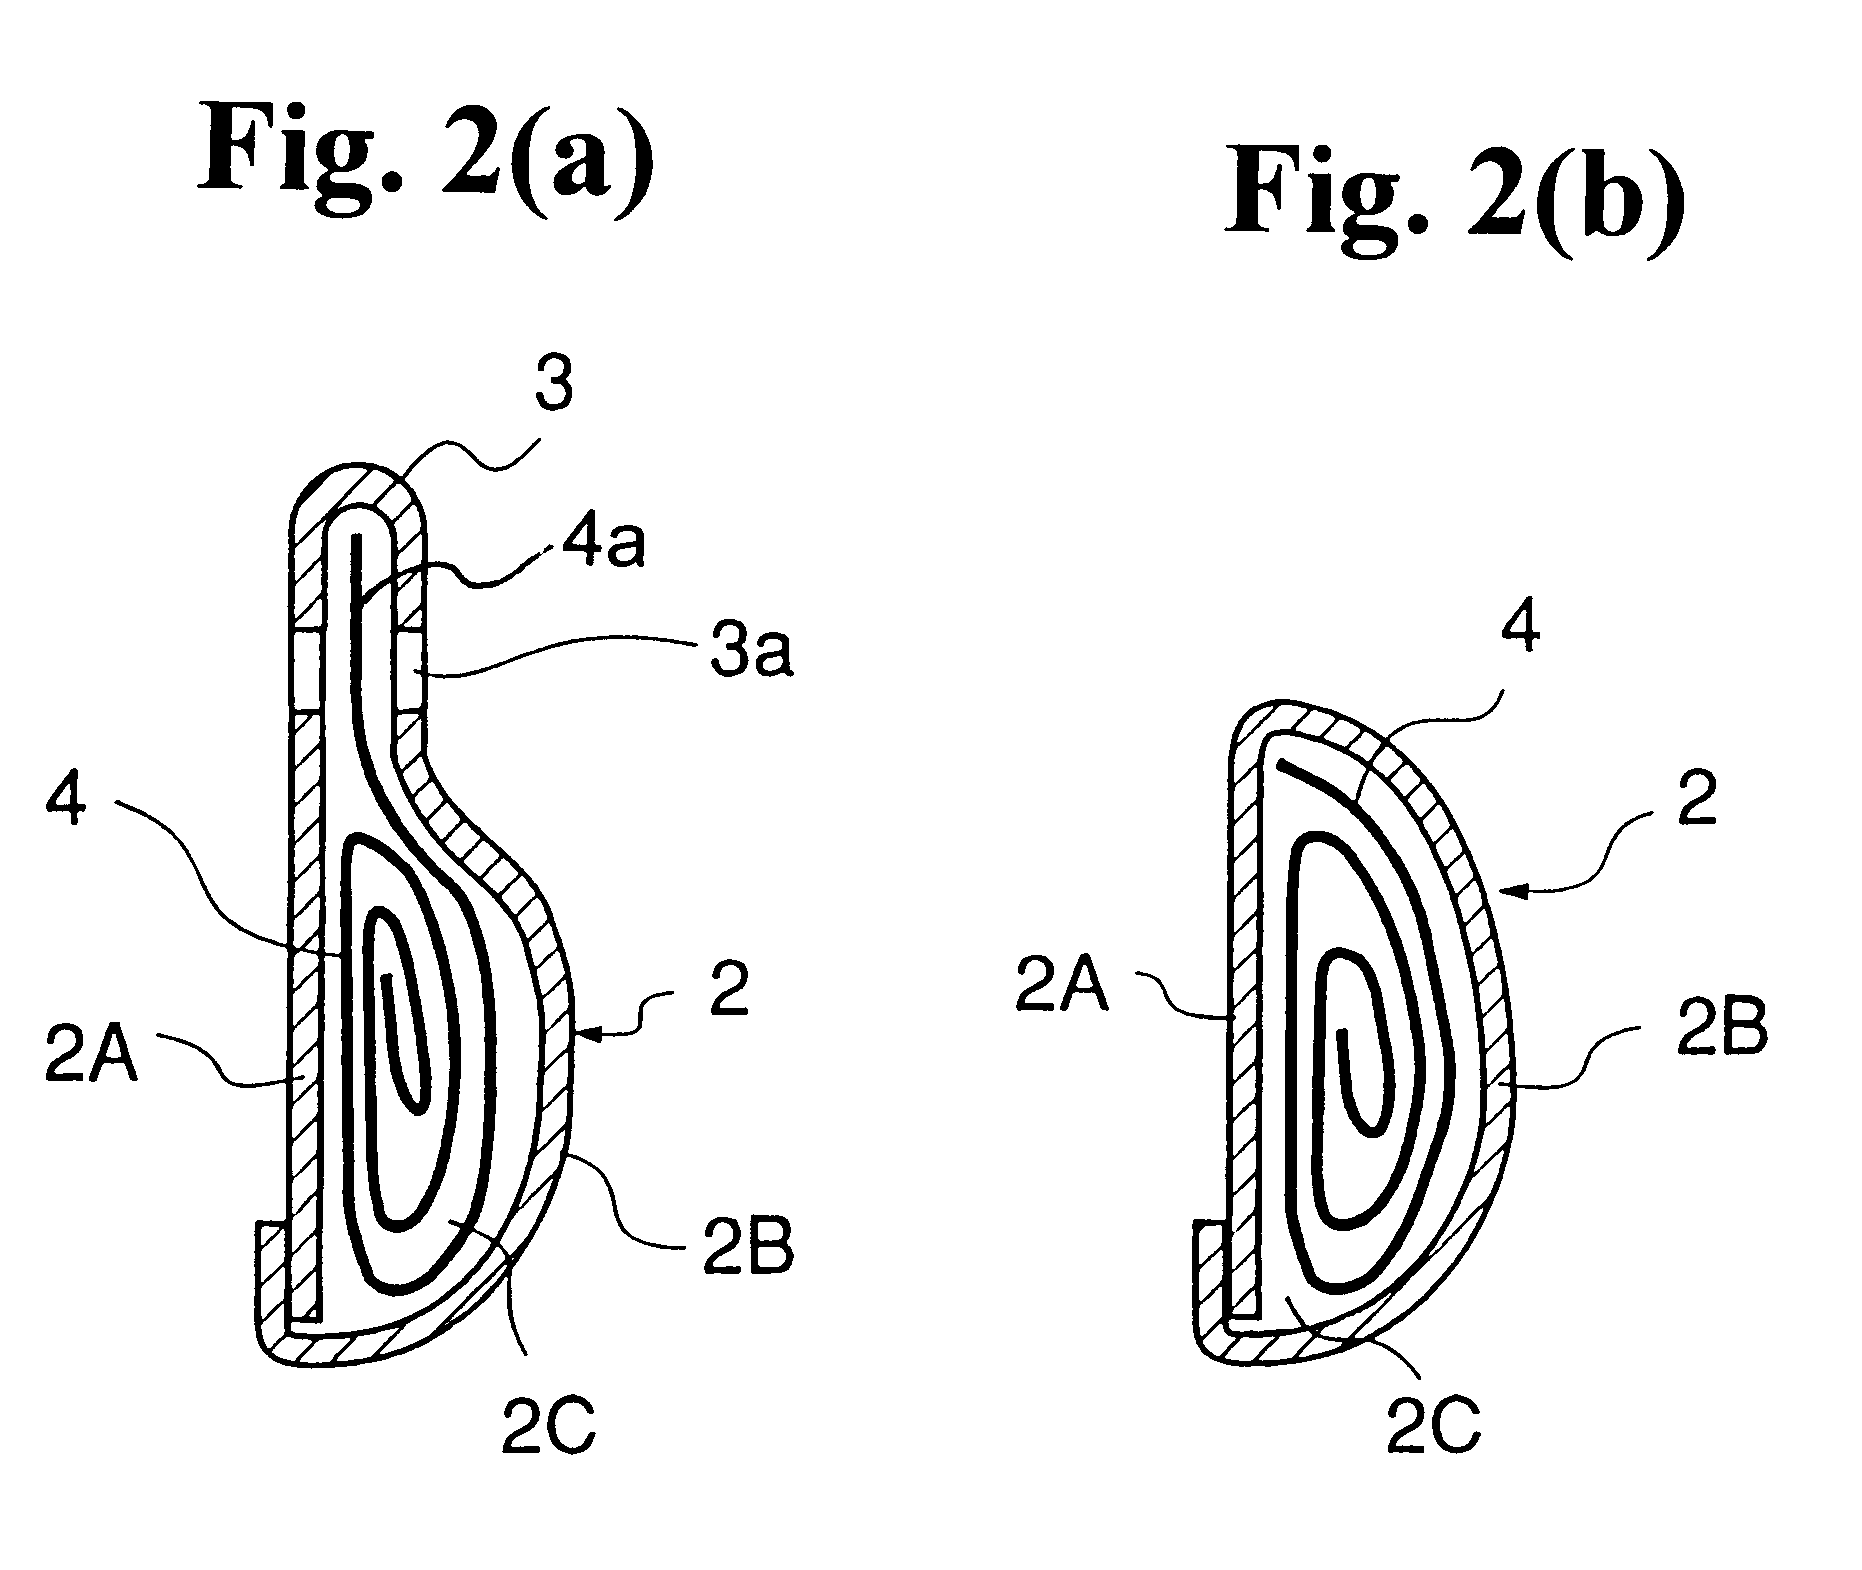 Side airbag device for restraining occupant's head